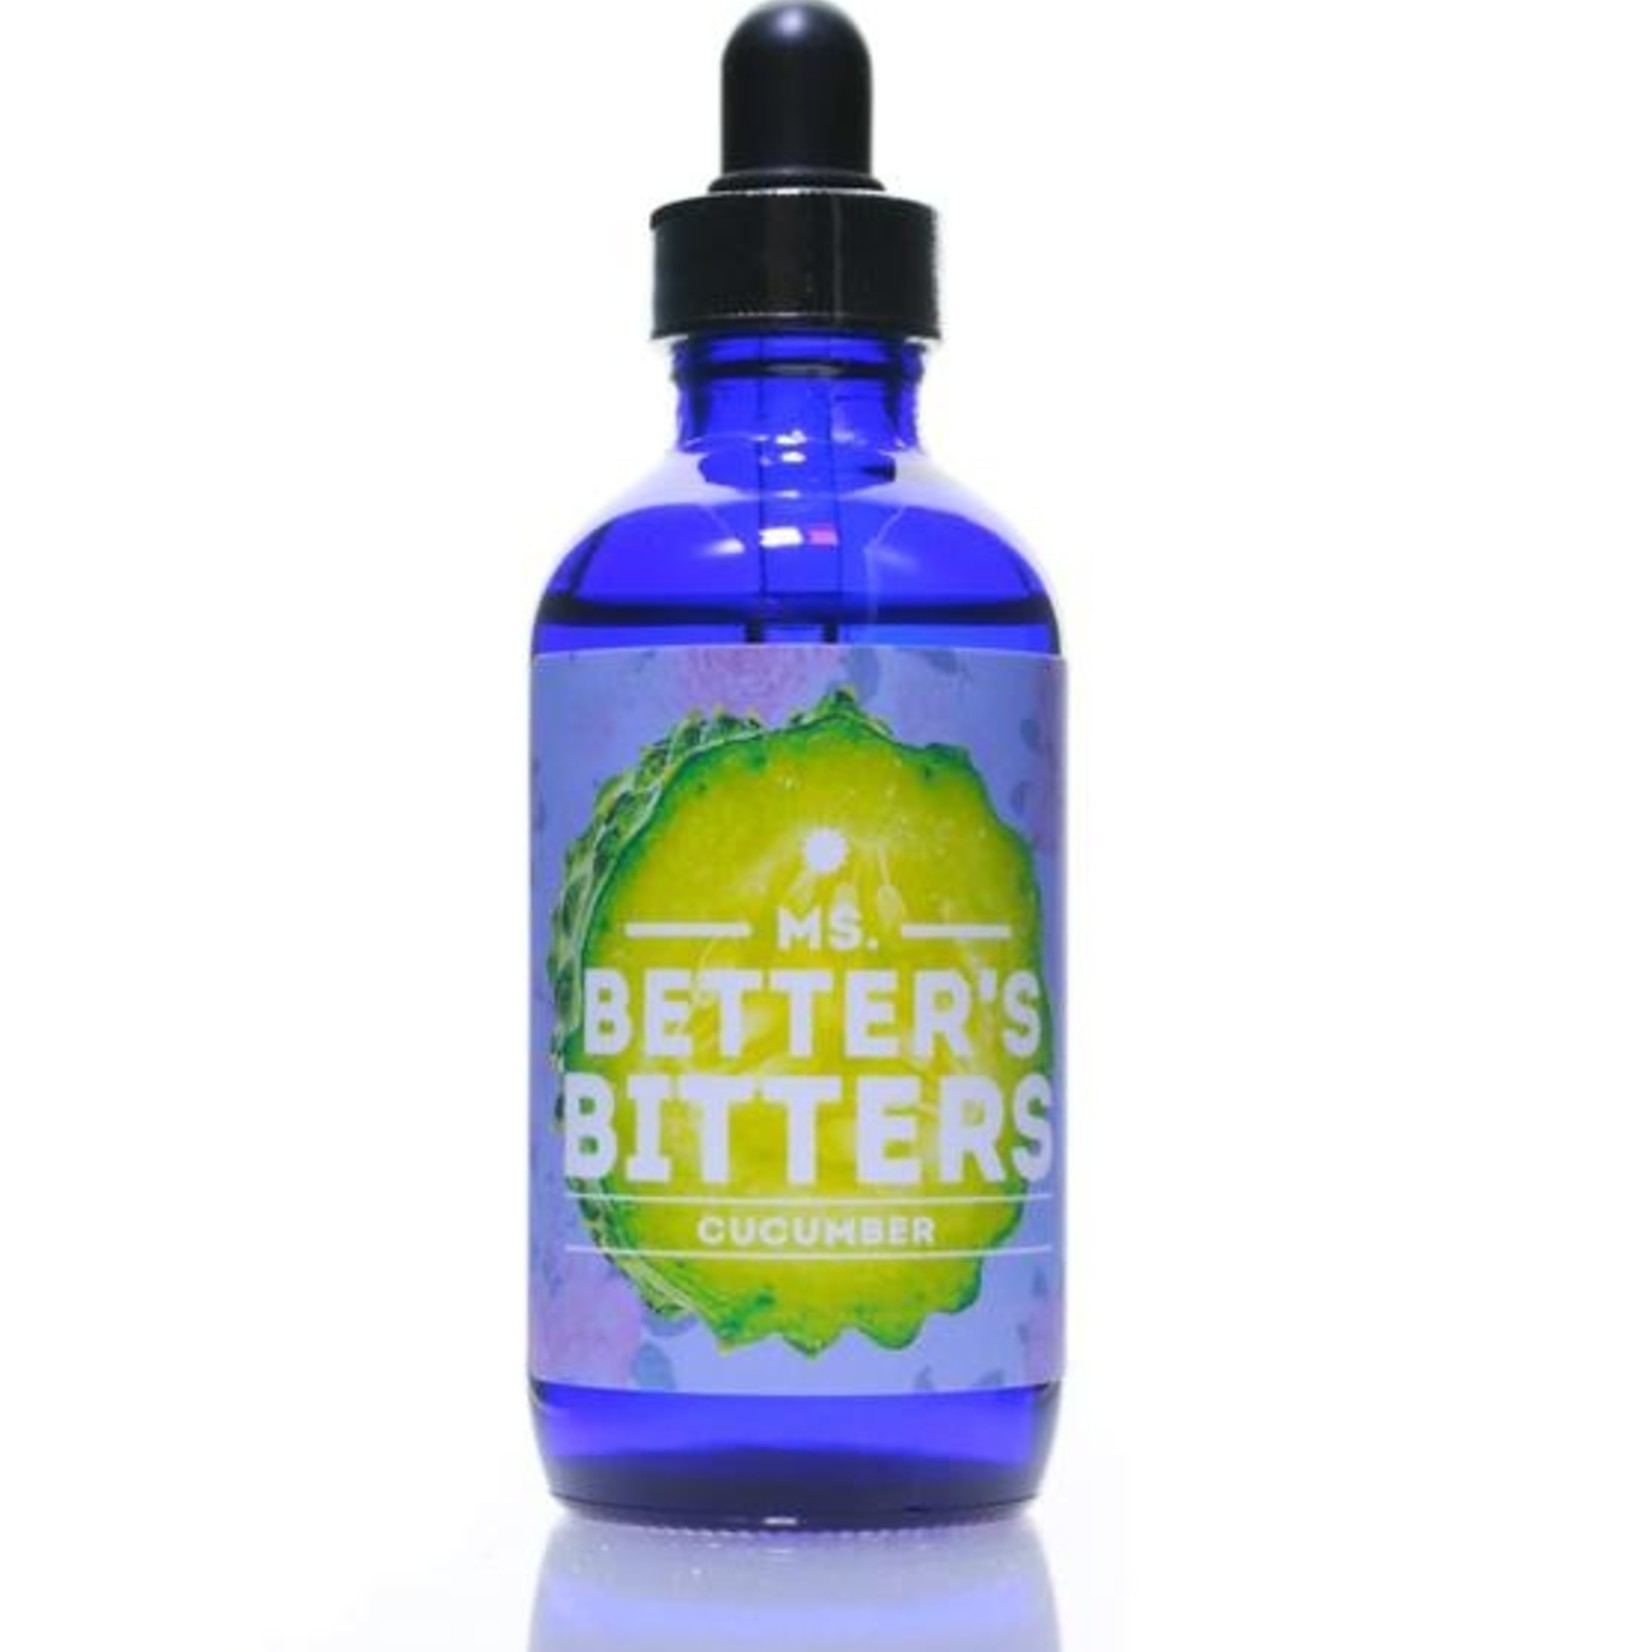 Ms Better's Bitters Ms Betters Bitters Cucumber